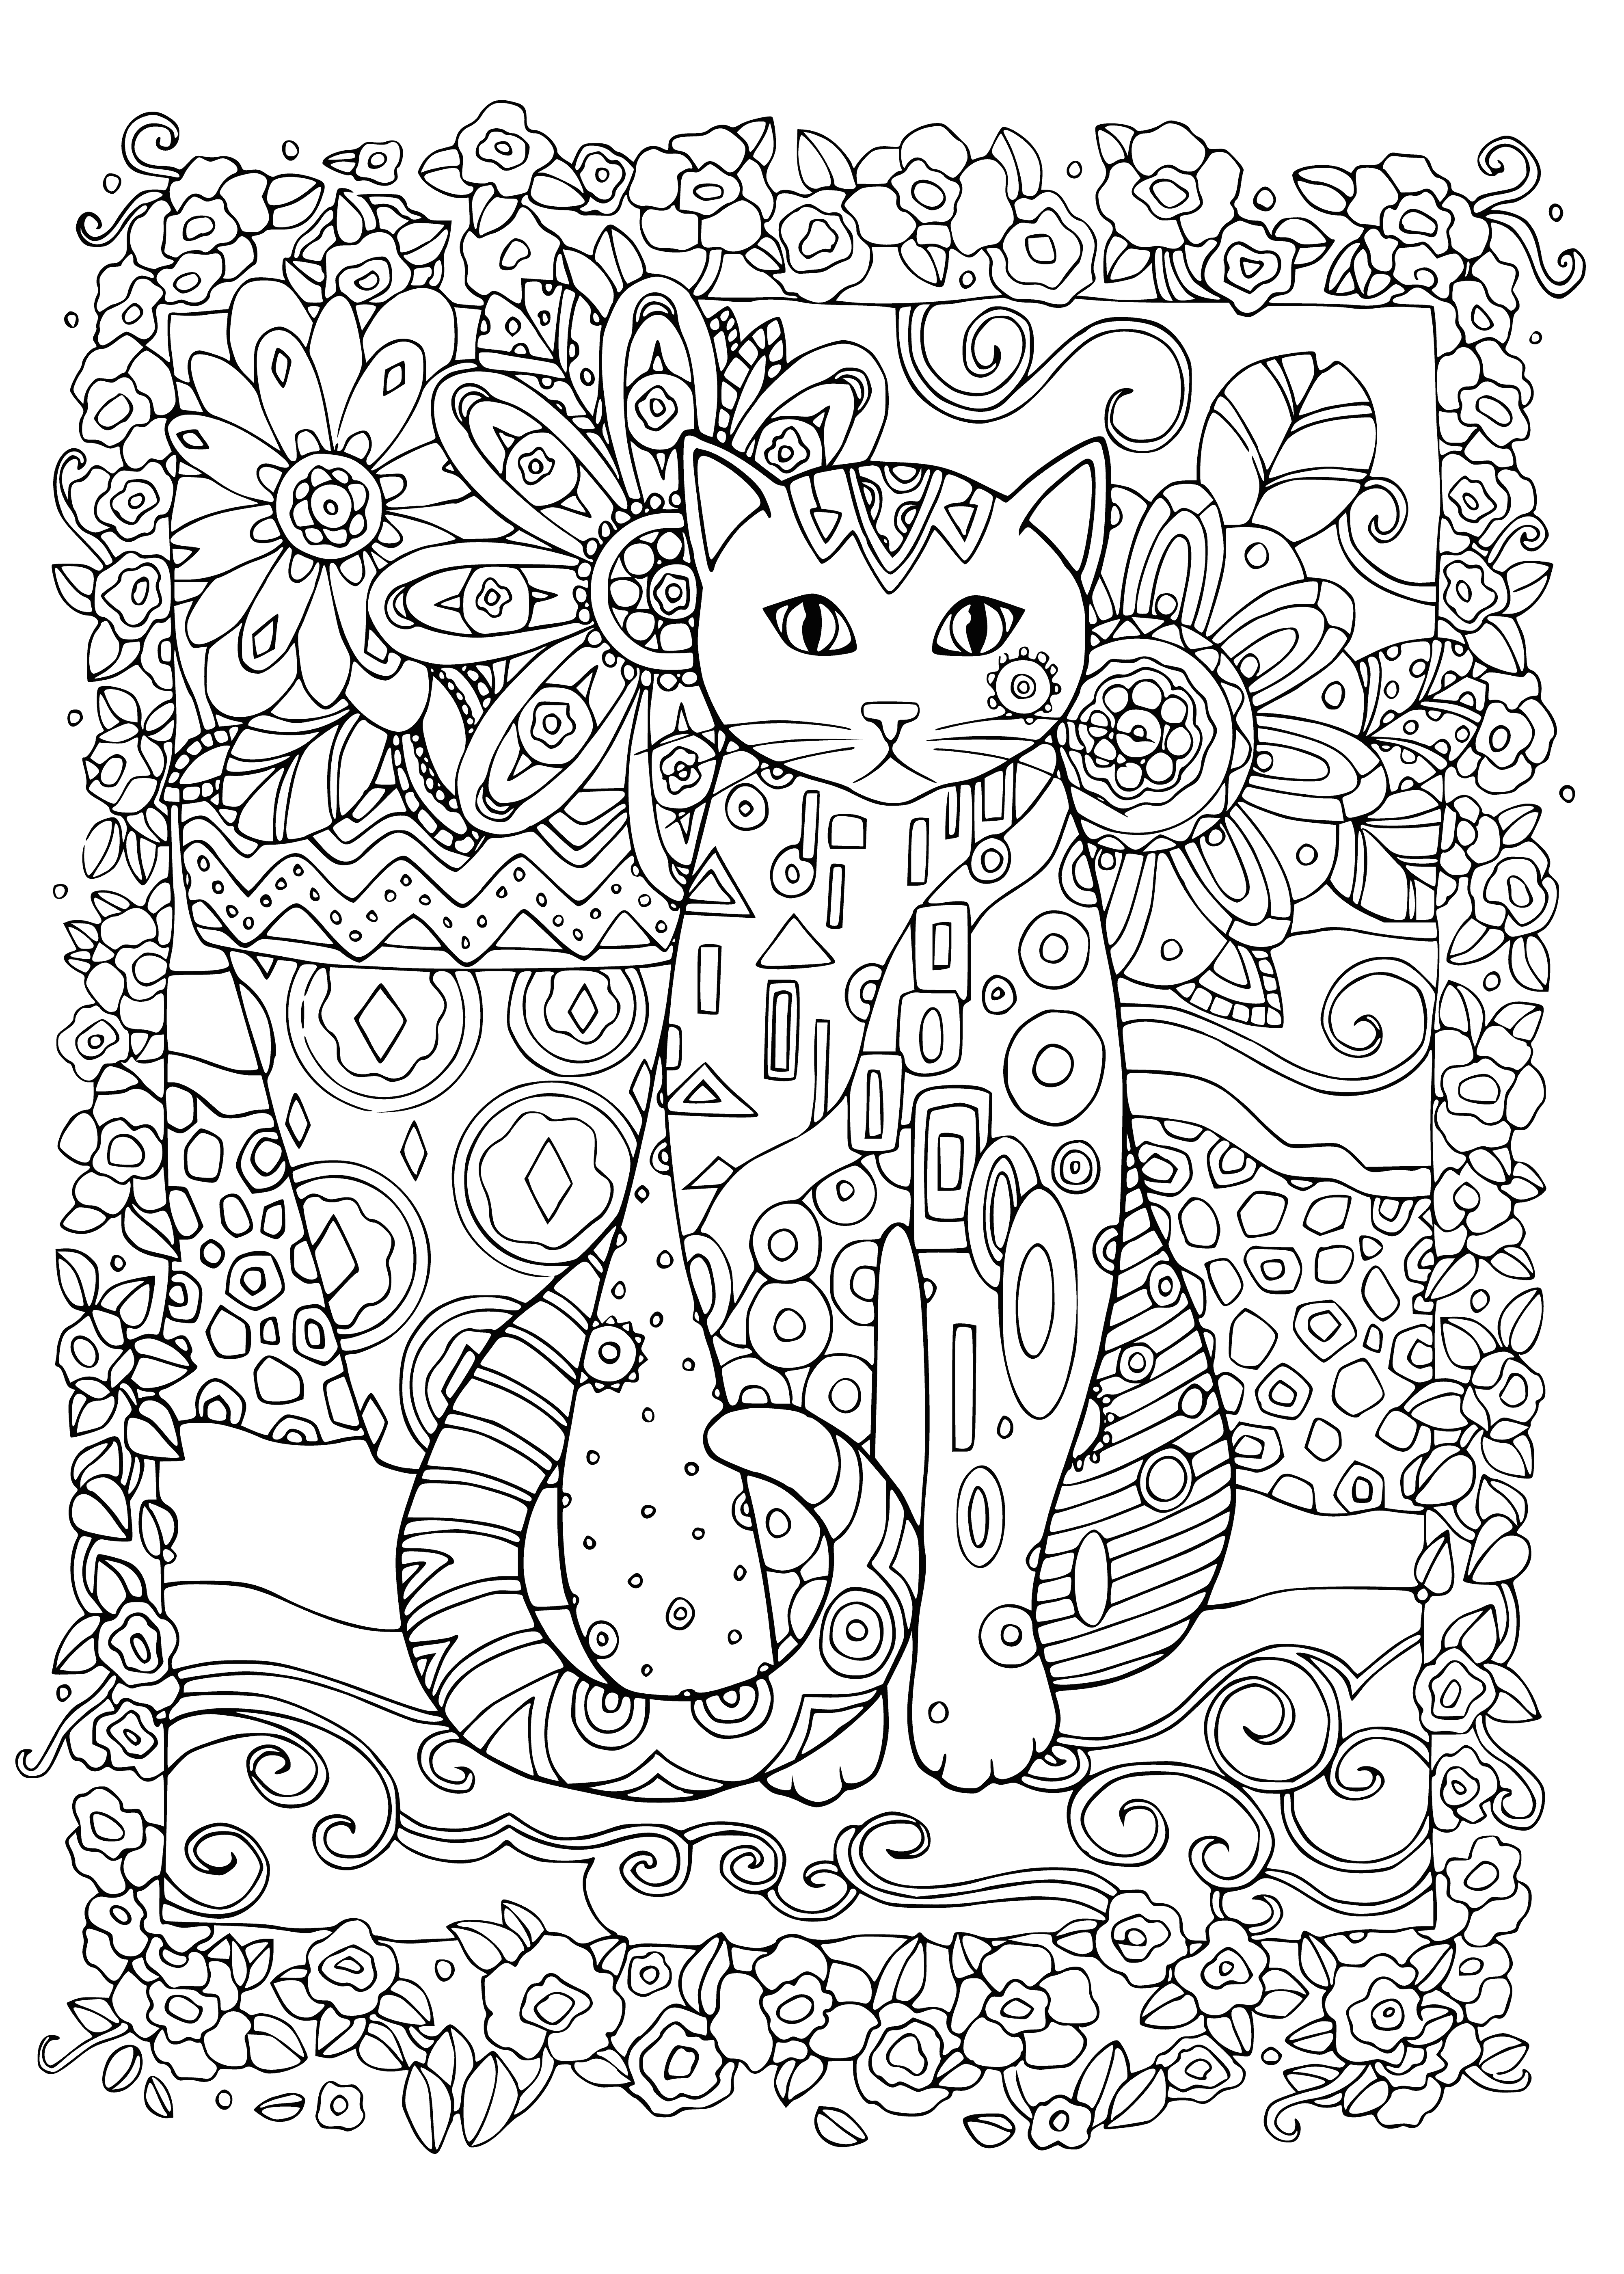 coloring page: A black cat with a blue collar and bell sits in a field of multicolored flowers.